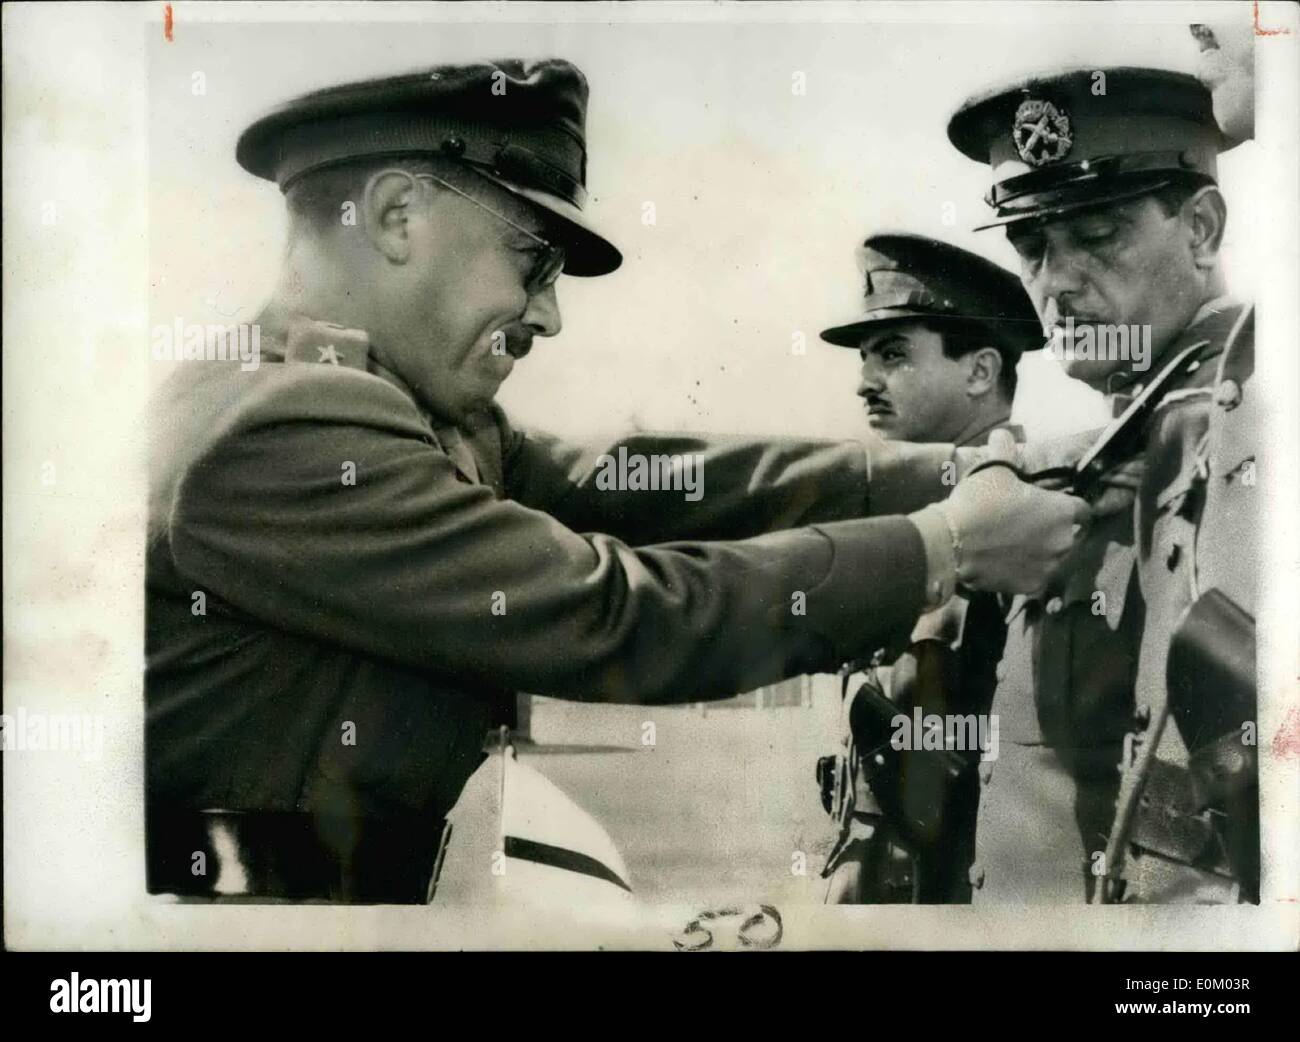 Feb. 02, 1953 - Egyptian General Striped Of His Rank - Medals Etc And Sentenced To Life Imprisonment: Th trial is just been concluded in Cadre of General Hussein Sorry Amer and Colonel El Sayed Farah. General Amer was sentenced to be stripped of his rank - medals etc. and to life imprisonment...Colonel Farah was acquitted. The charges were on destruction, anointing to revolt and trafficking in arms with Israel. General Amer was the icier whom ex-King Farouk tried to force last year into the presidency of the officers' Club at Cairo against the vote for General Naguib Stock Photo